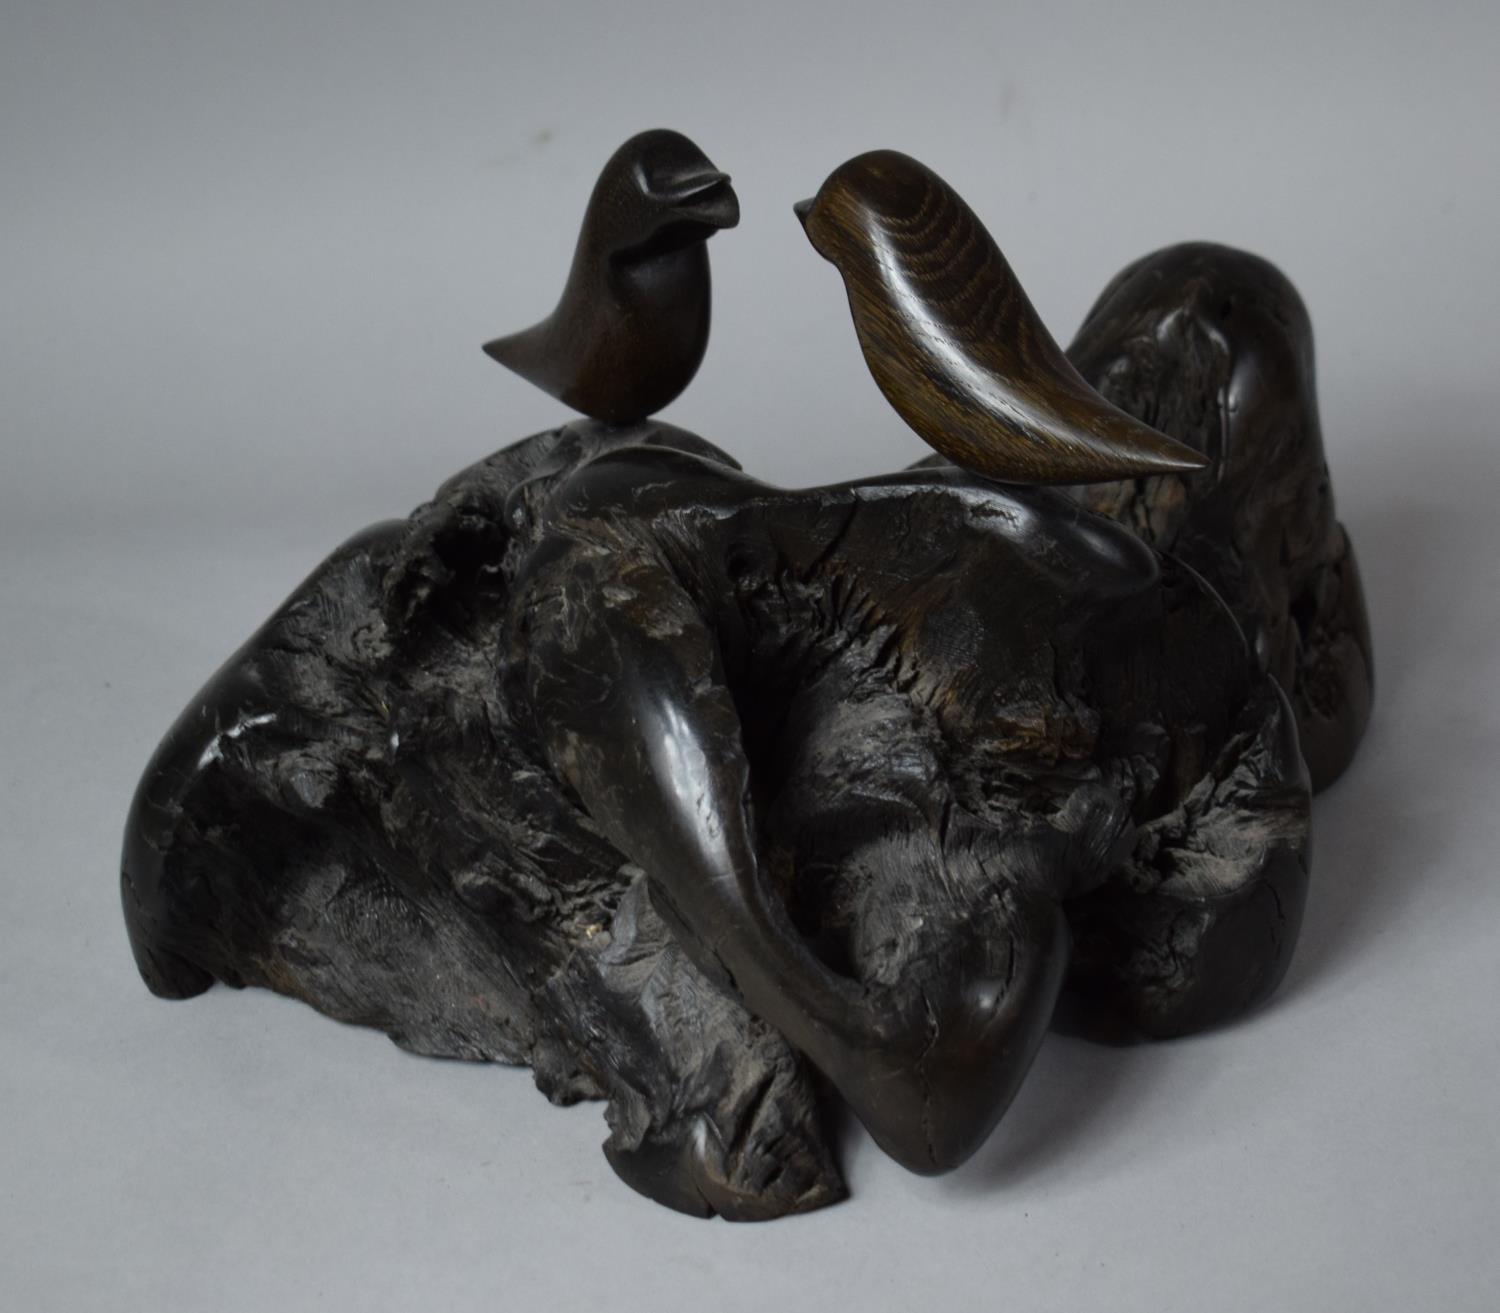 A Carved Irish Bog Oak Ornament, "Lone Birds", 5600 years old, Beeswax Finish, Signed K. Casey 2006, - Image 3 of 5